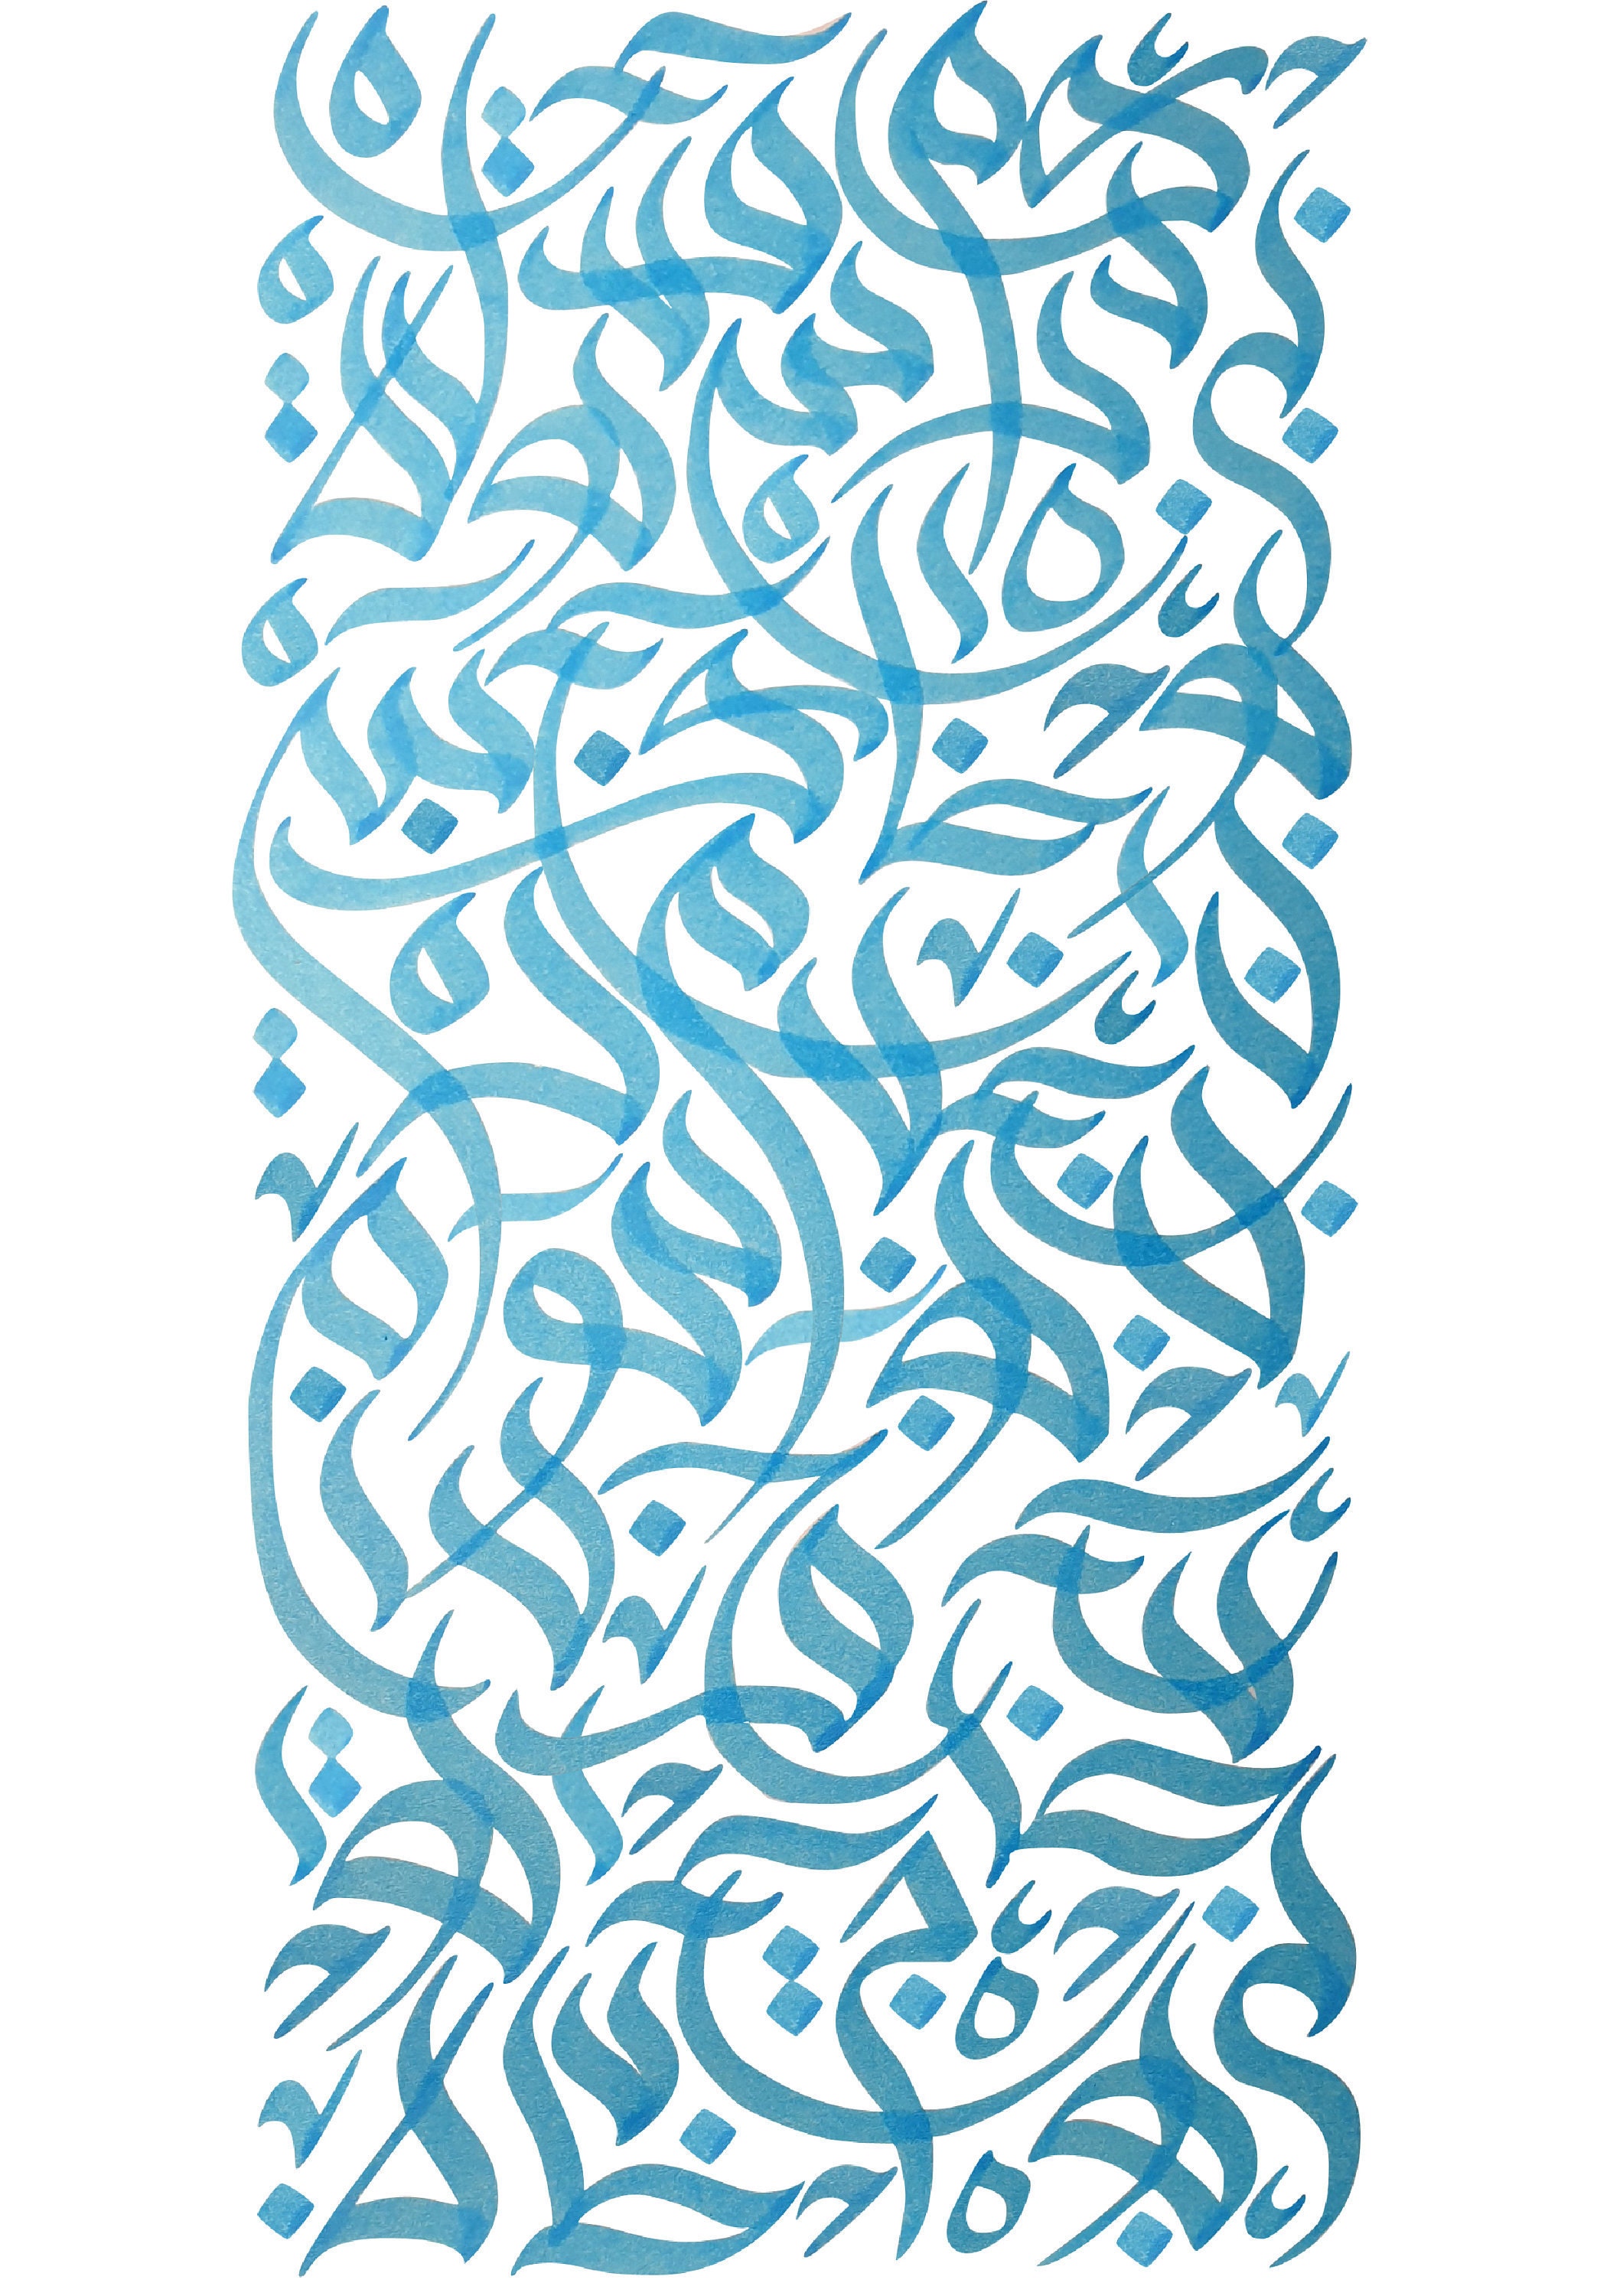 144,420 Arabic Calligraphy Pattern Images, Stock Photos, 3D objects, &  Vectors